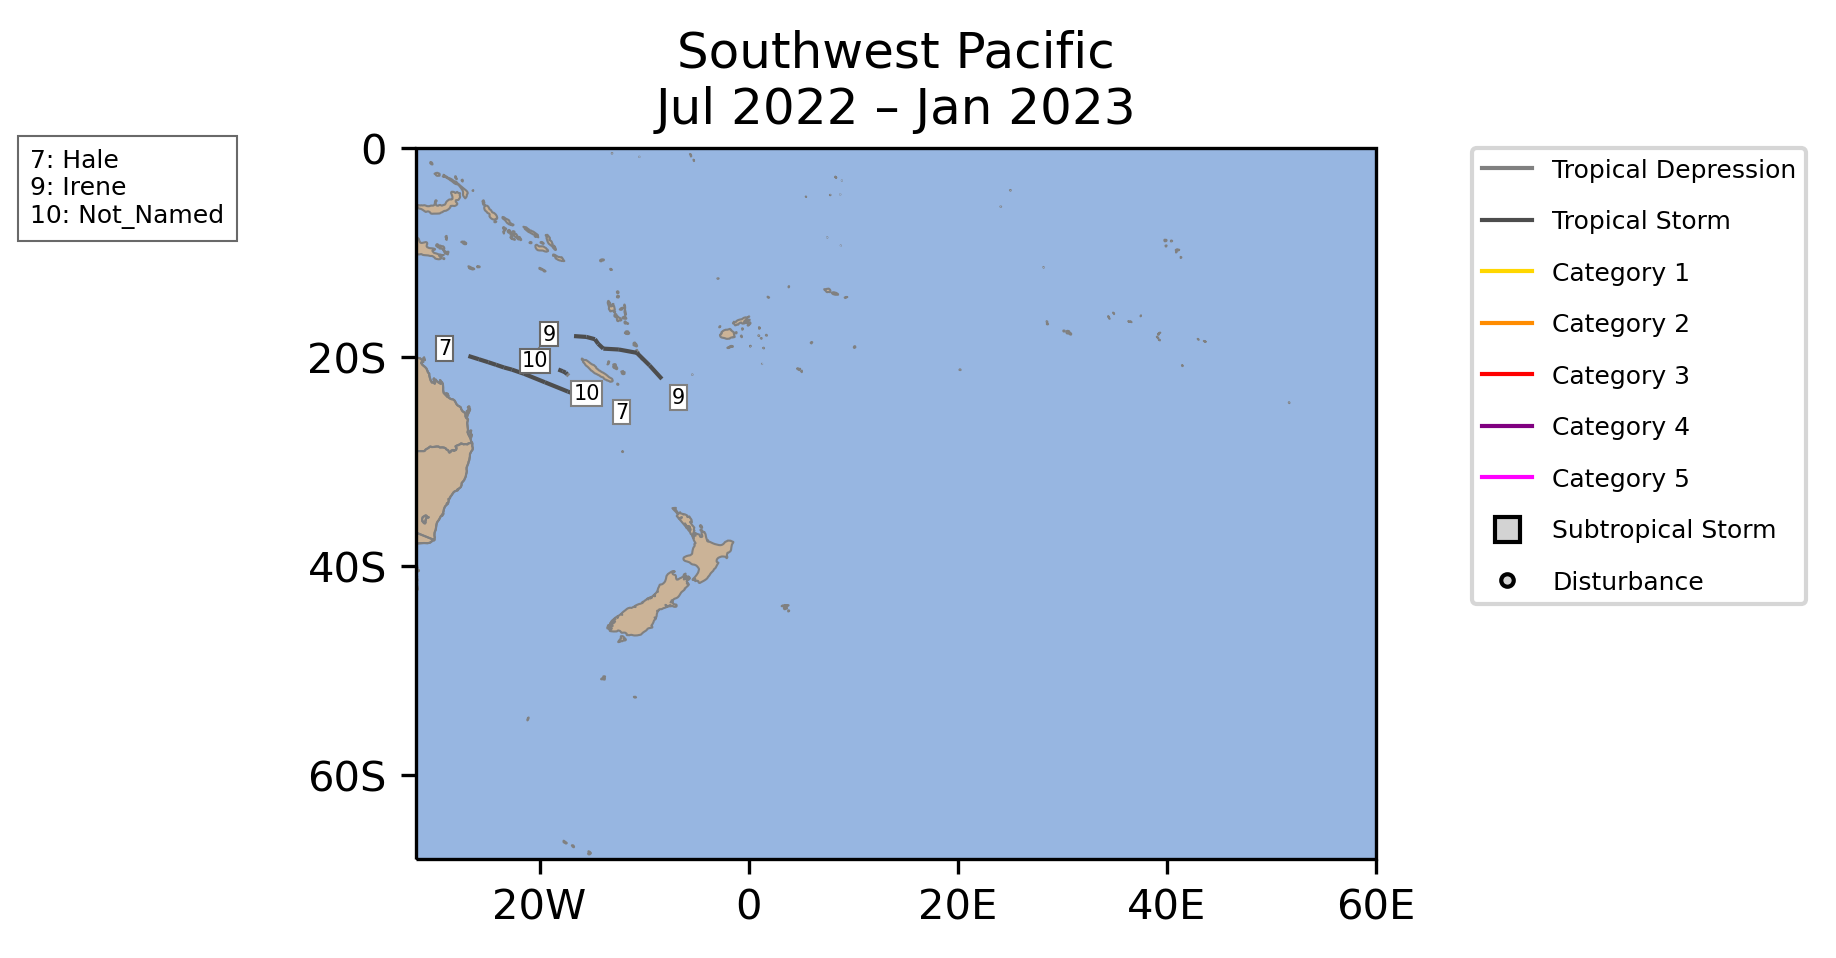 Southwest Pacific Tropical Cyclone Storm Tracks July 2022-January 2023